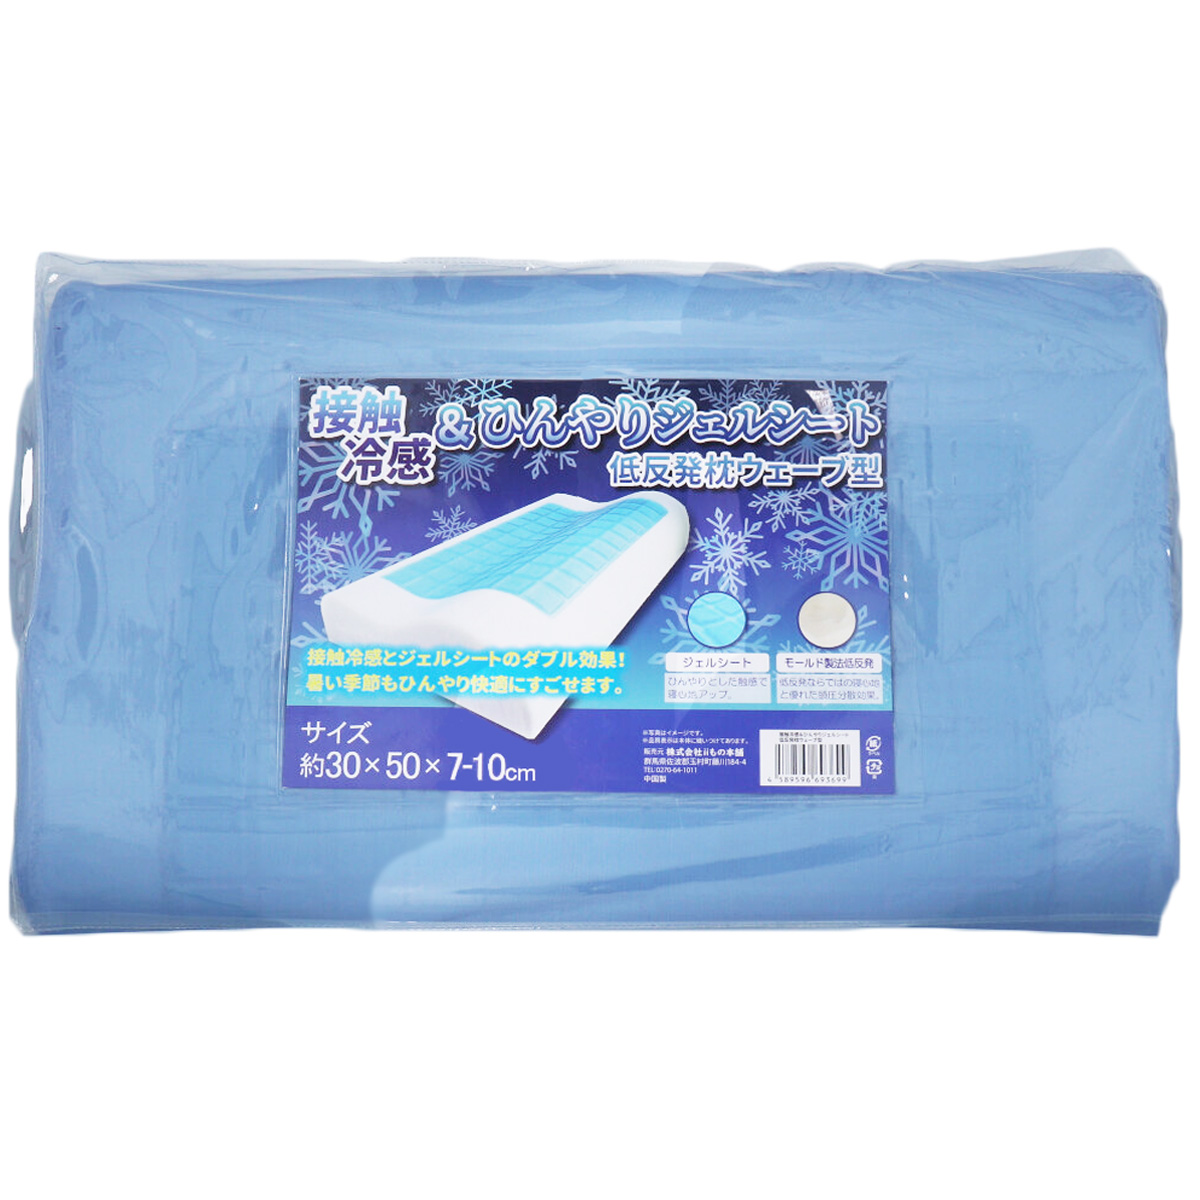 Picture of Cool Touch Cool Gel Sheet Memory Foam Wave Type Pillow